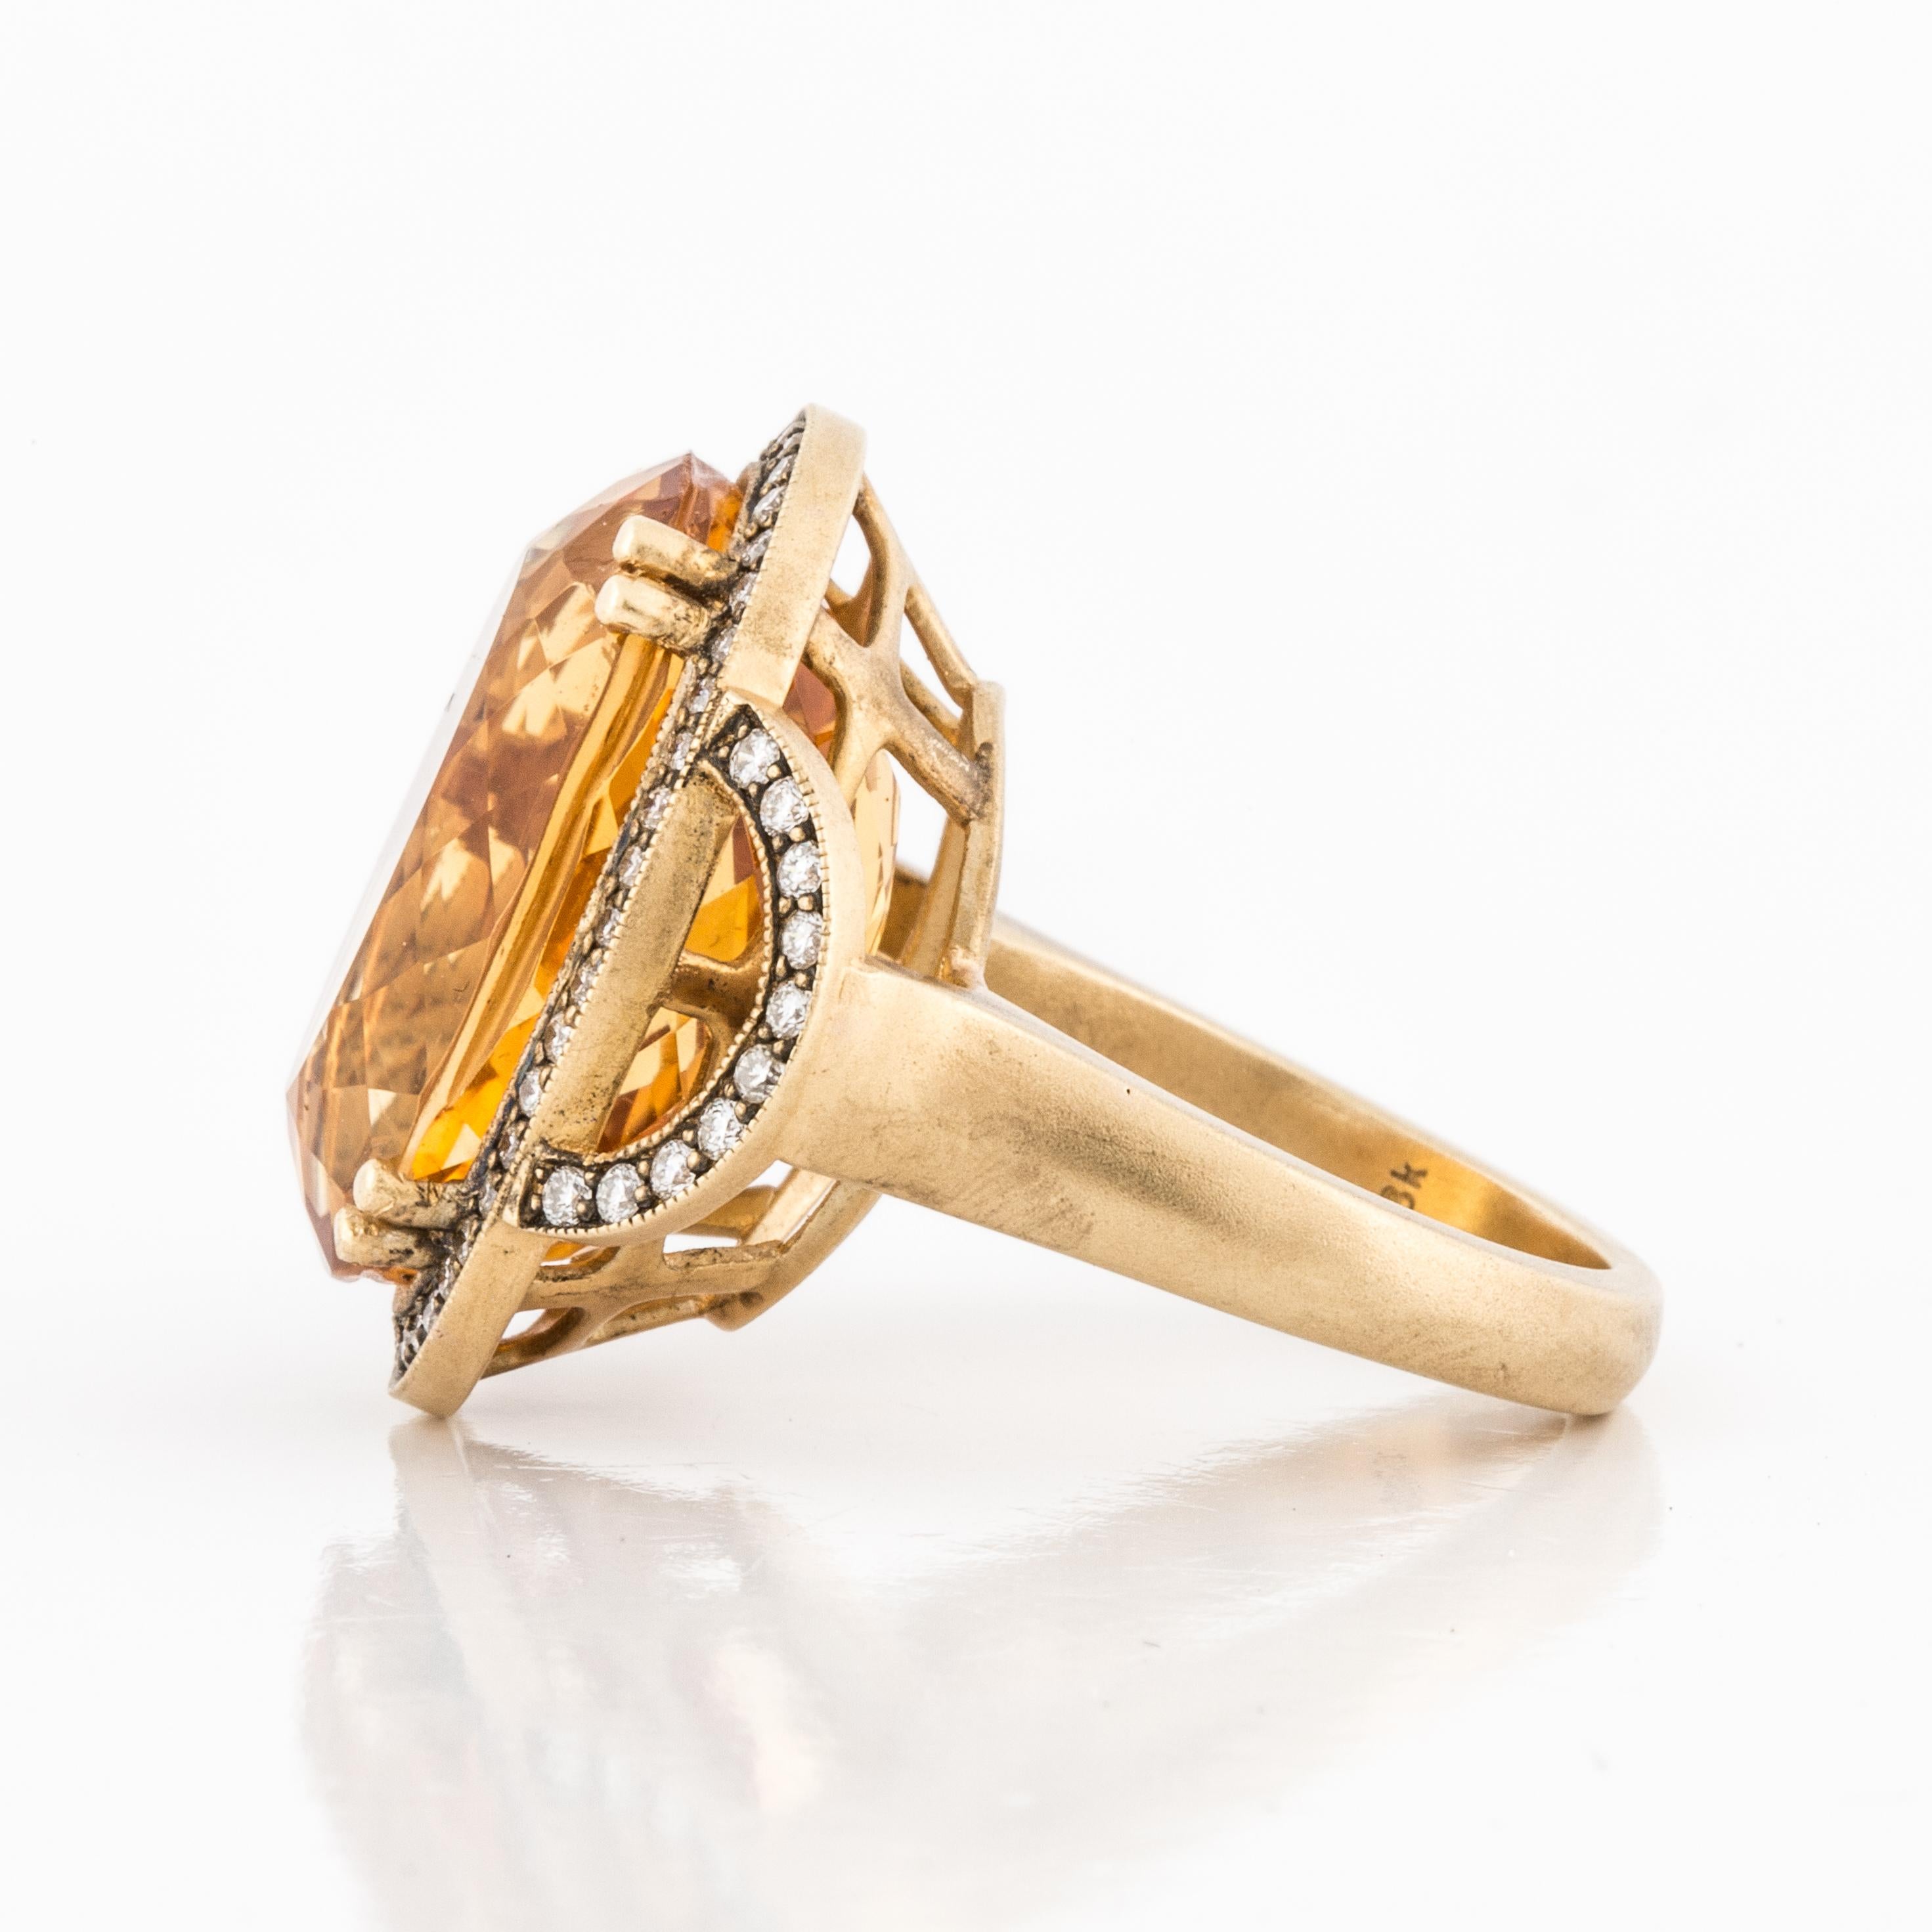 18K yellow gold ring featuring an oval citrine that totals 18 carats accented by sixty-five (65) round brilliant-cut diamonds that total 0.65 carats.  The gold has a soft matte finish. Large presentation area, measuring 1 3/16 inches by 15/16 inches.